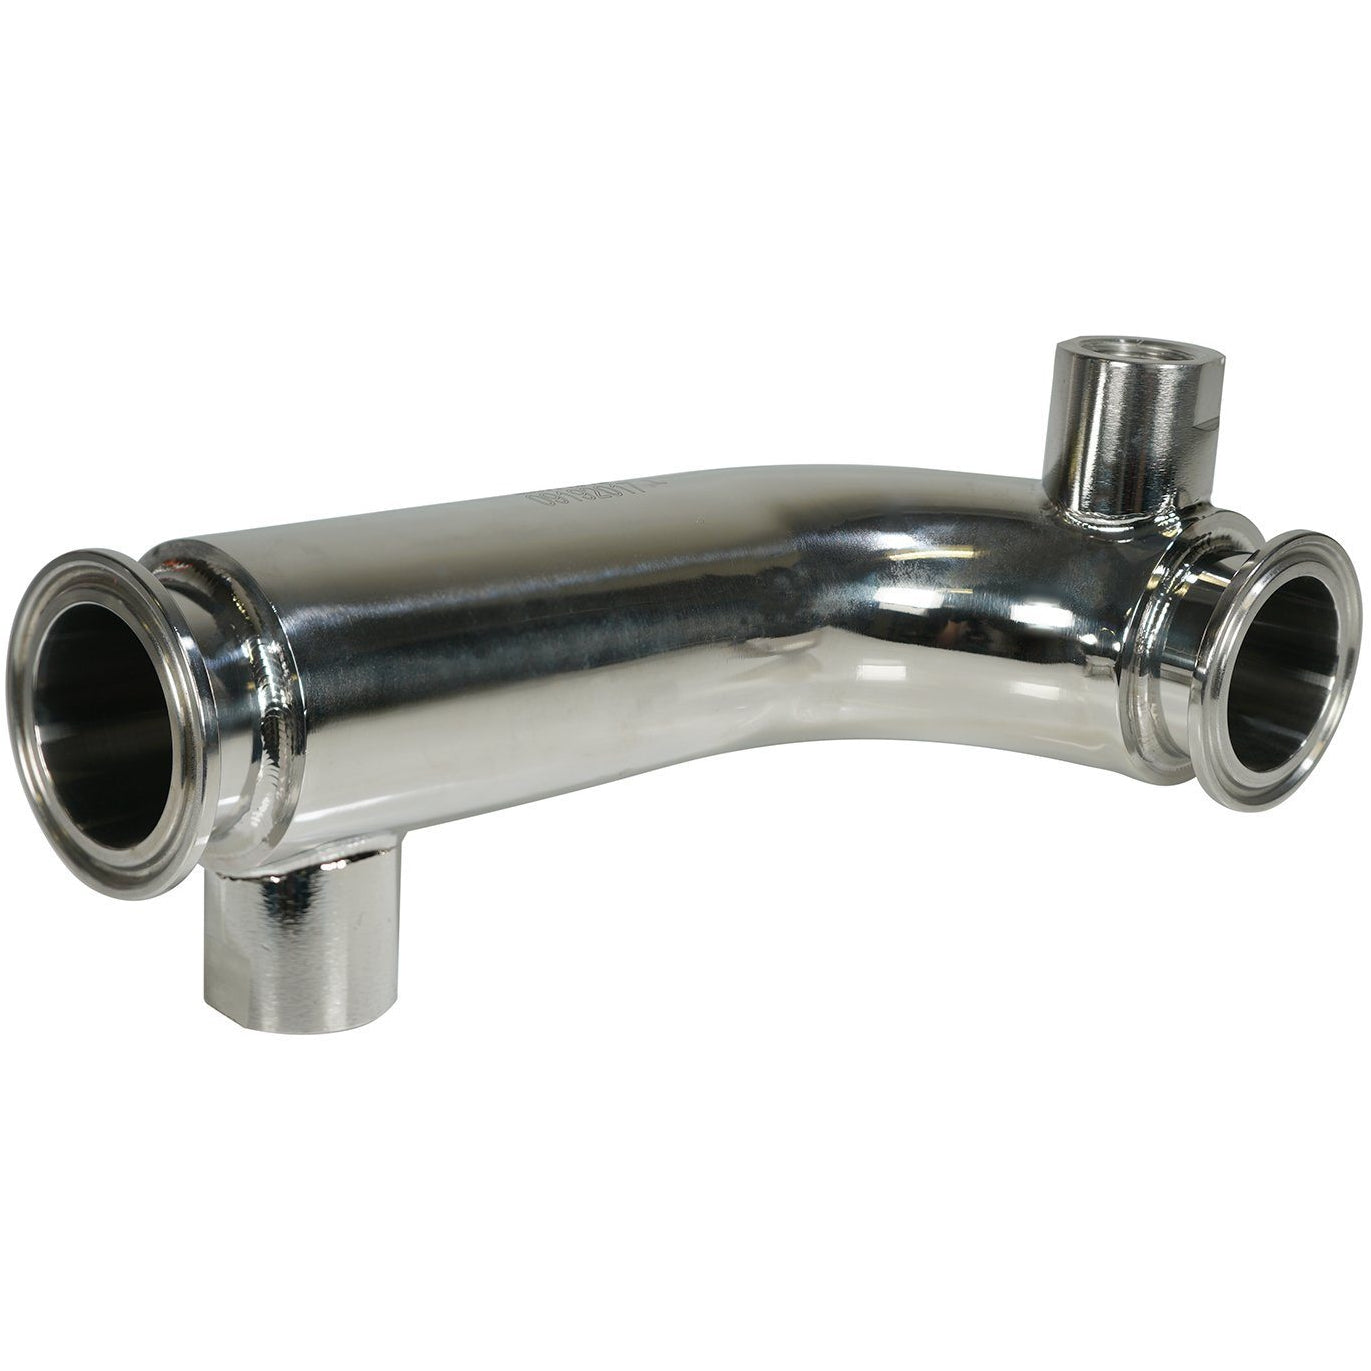 BVV, 1.5" Fully Jacketed Tri-Clamp x 8" 90 Degree Bend